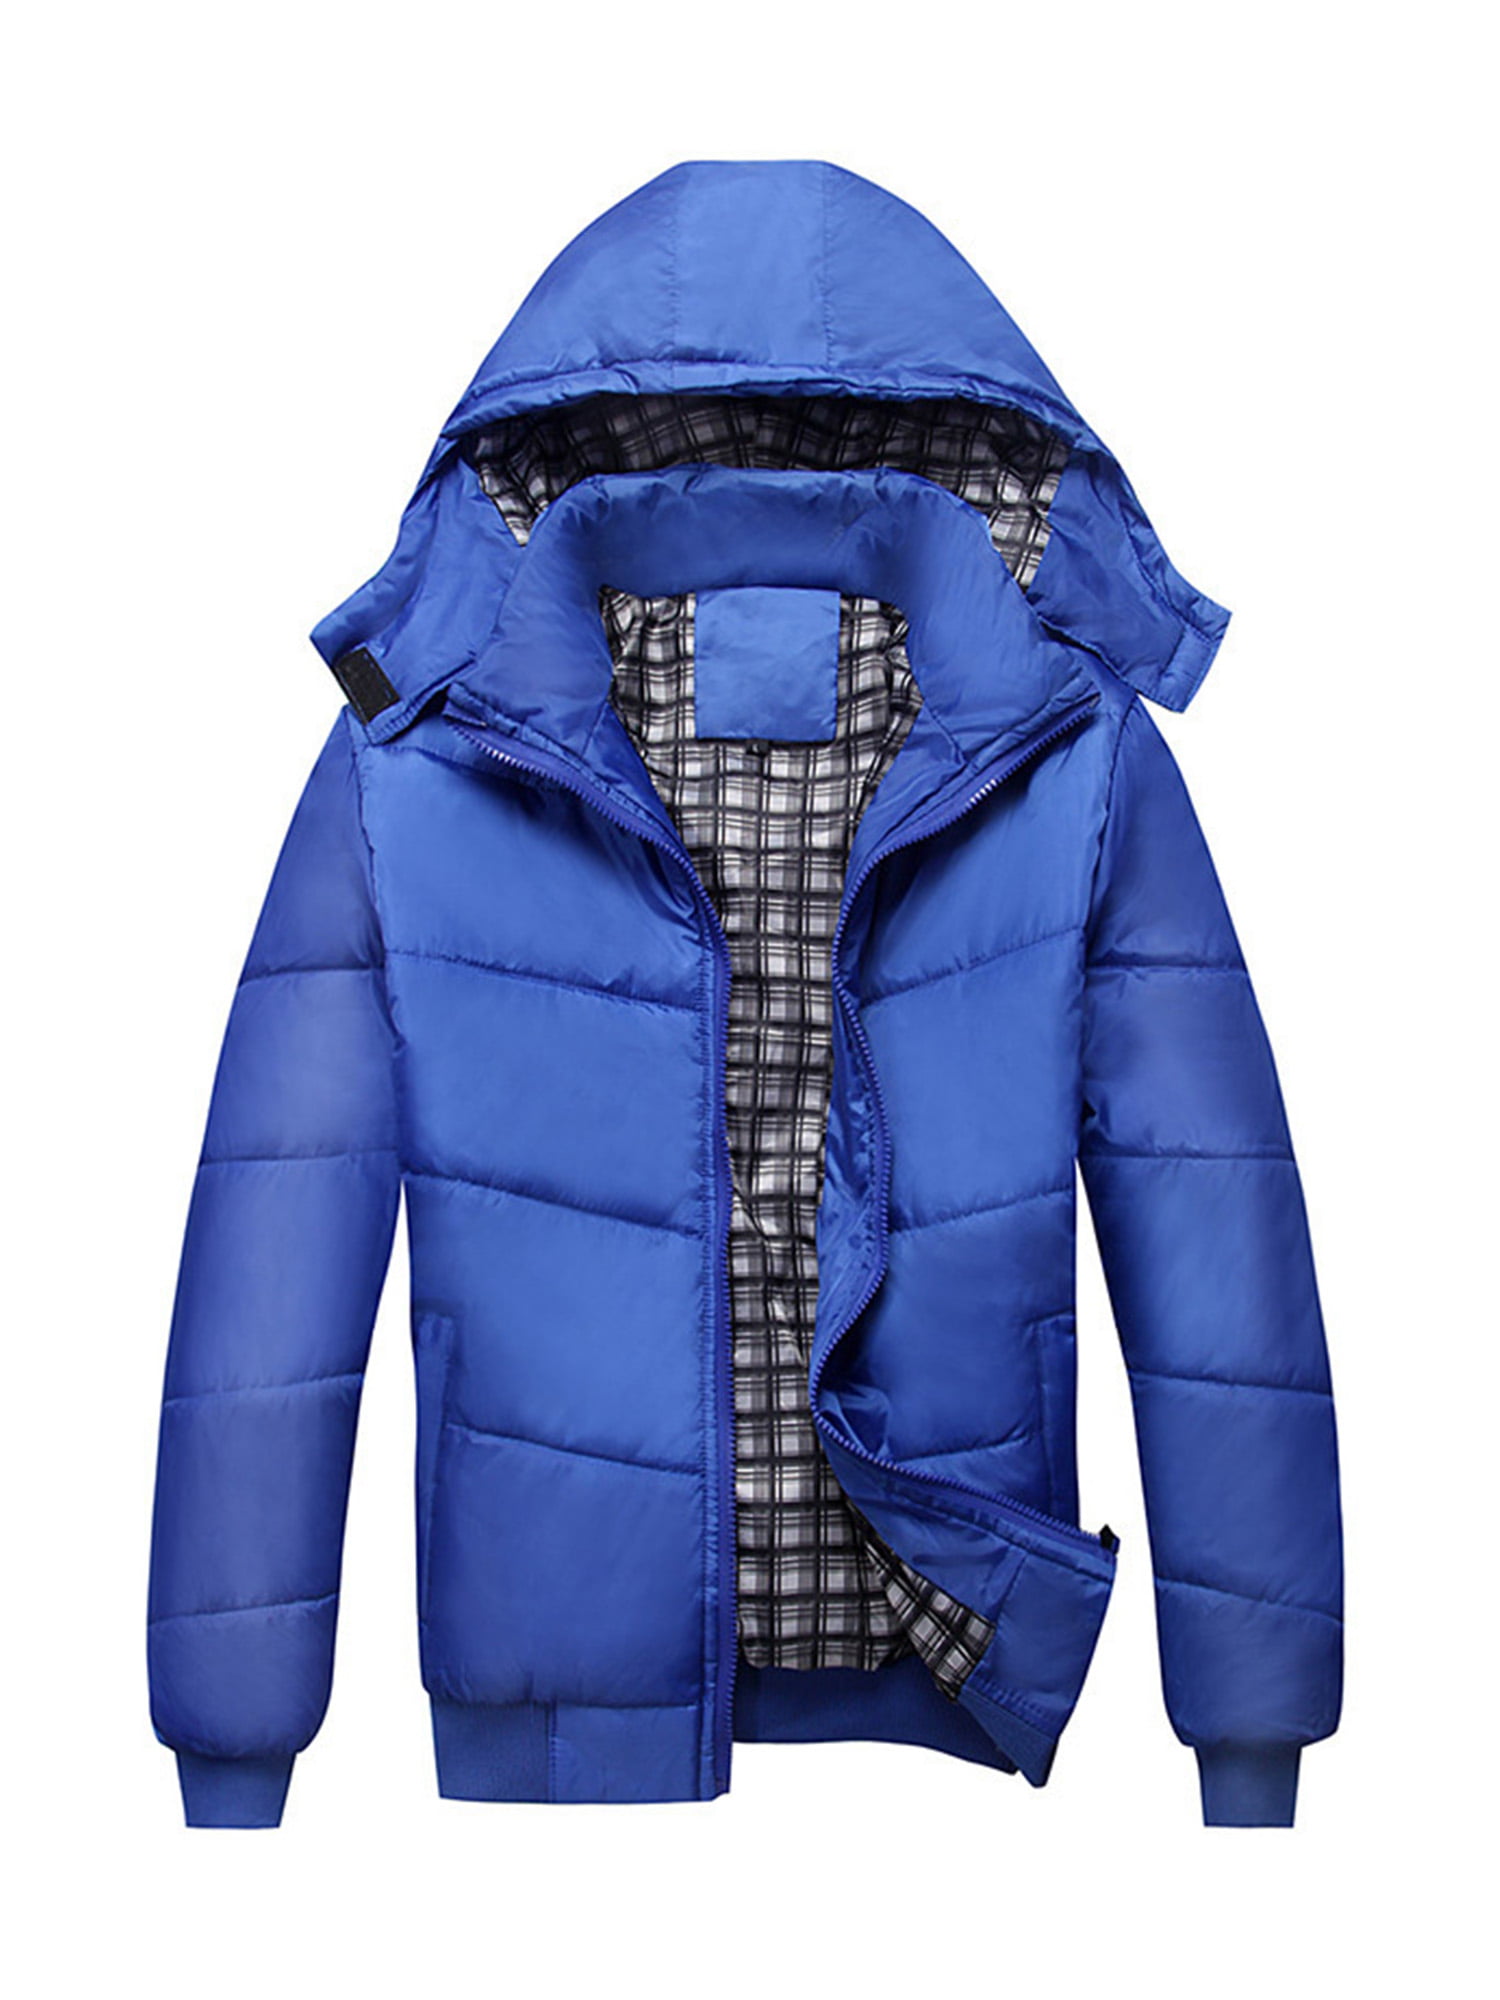 MEANIT Mens Classic Hooded Puffer Jacket,Autumn Winter Casual Solid Jacket Long Sleeved Coat 